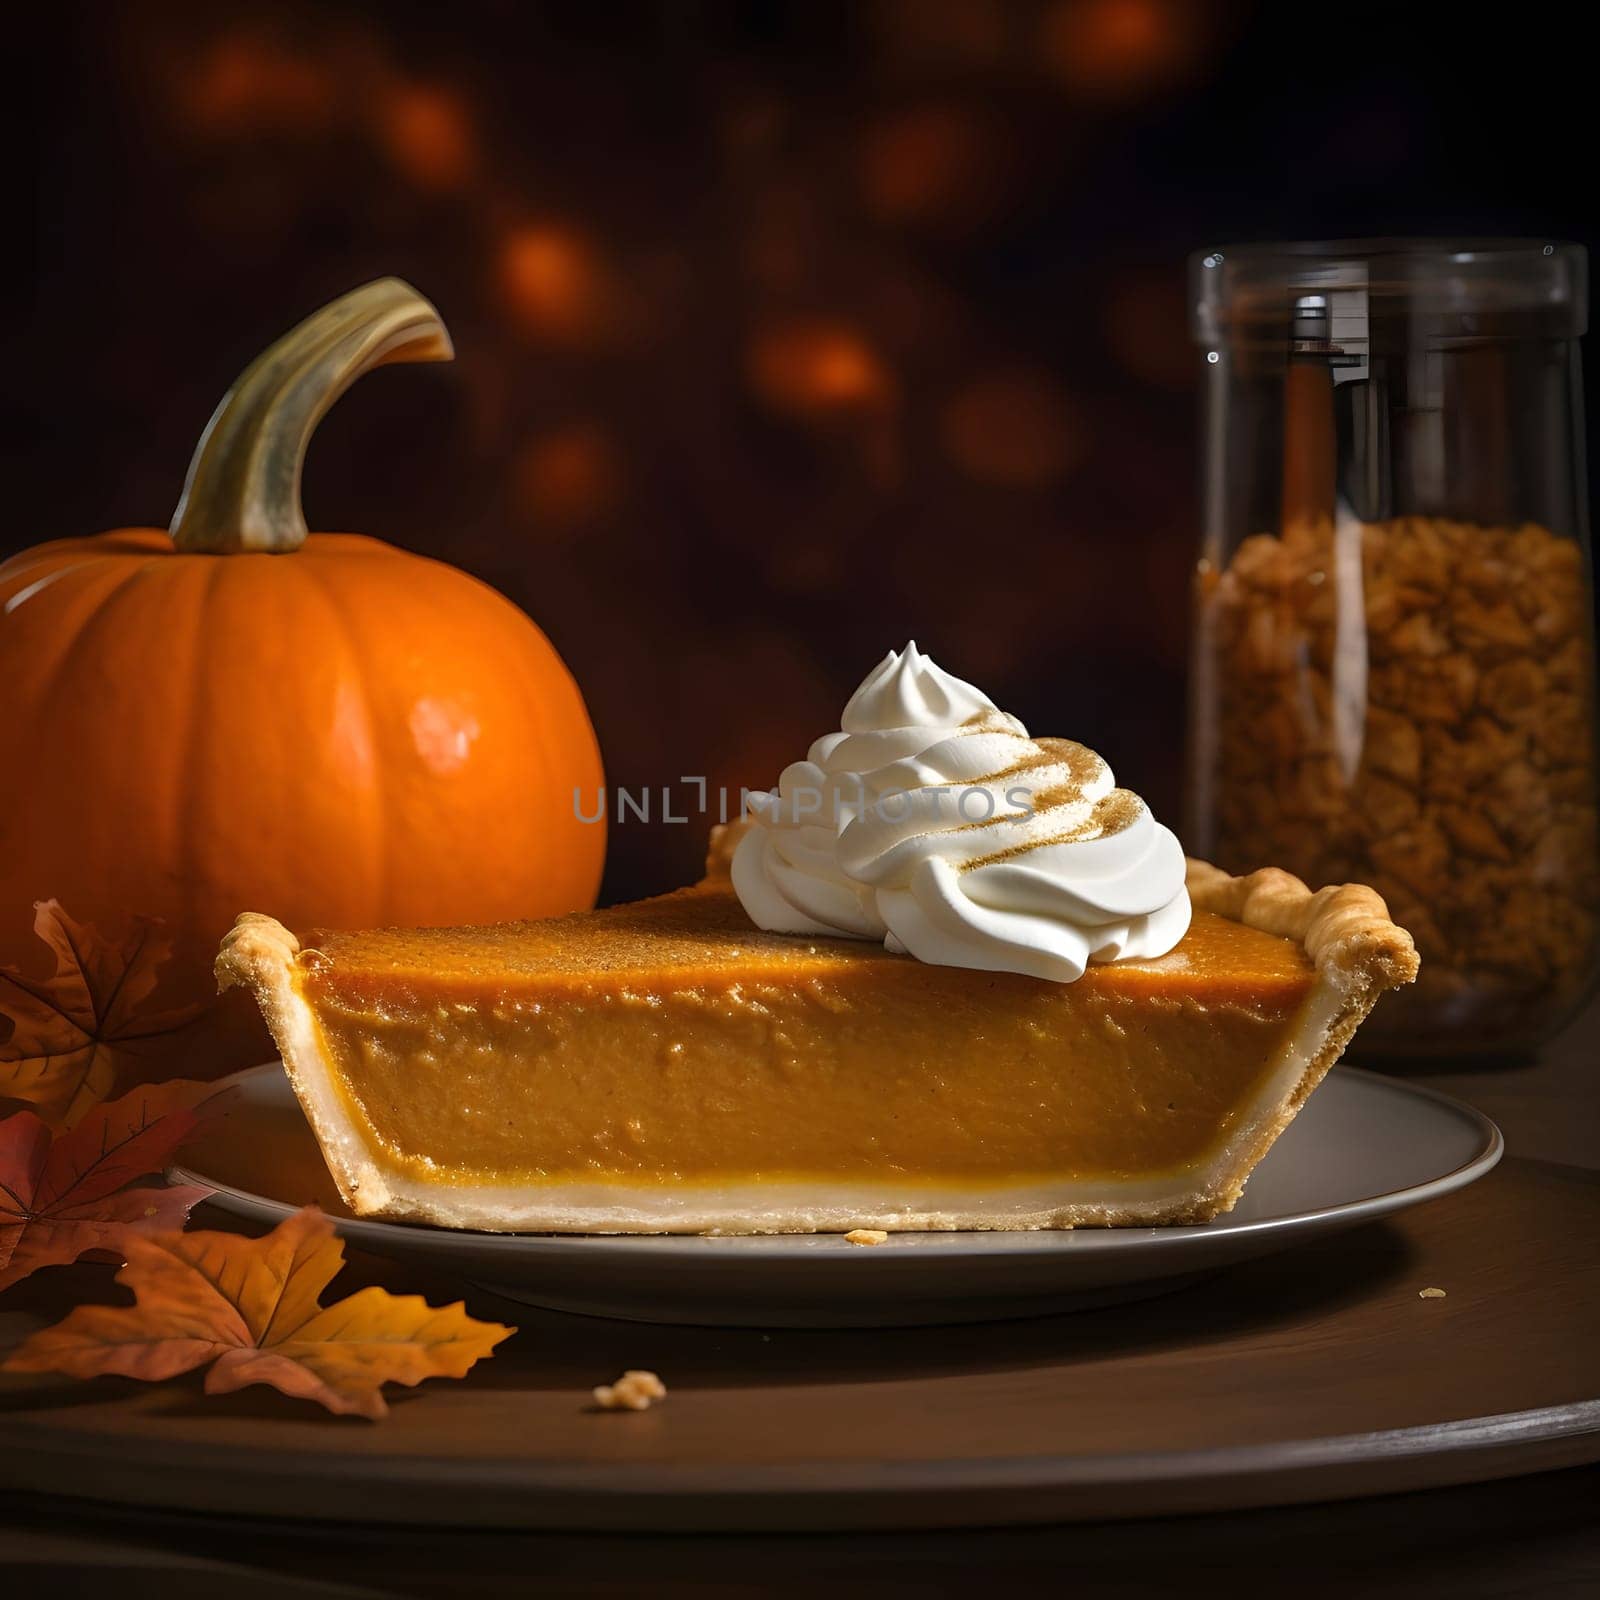 A piece of pumpkin pie with meringue on a plate with honey and pumpkin in the background. Pumpkin as a dish of thanksgiving for the harvest. An atmosphere of joy and celebration.